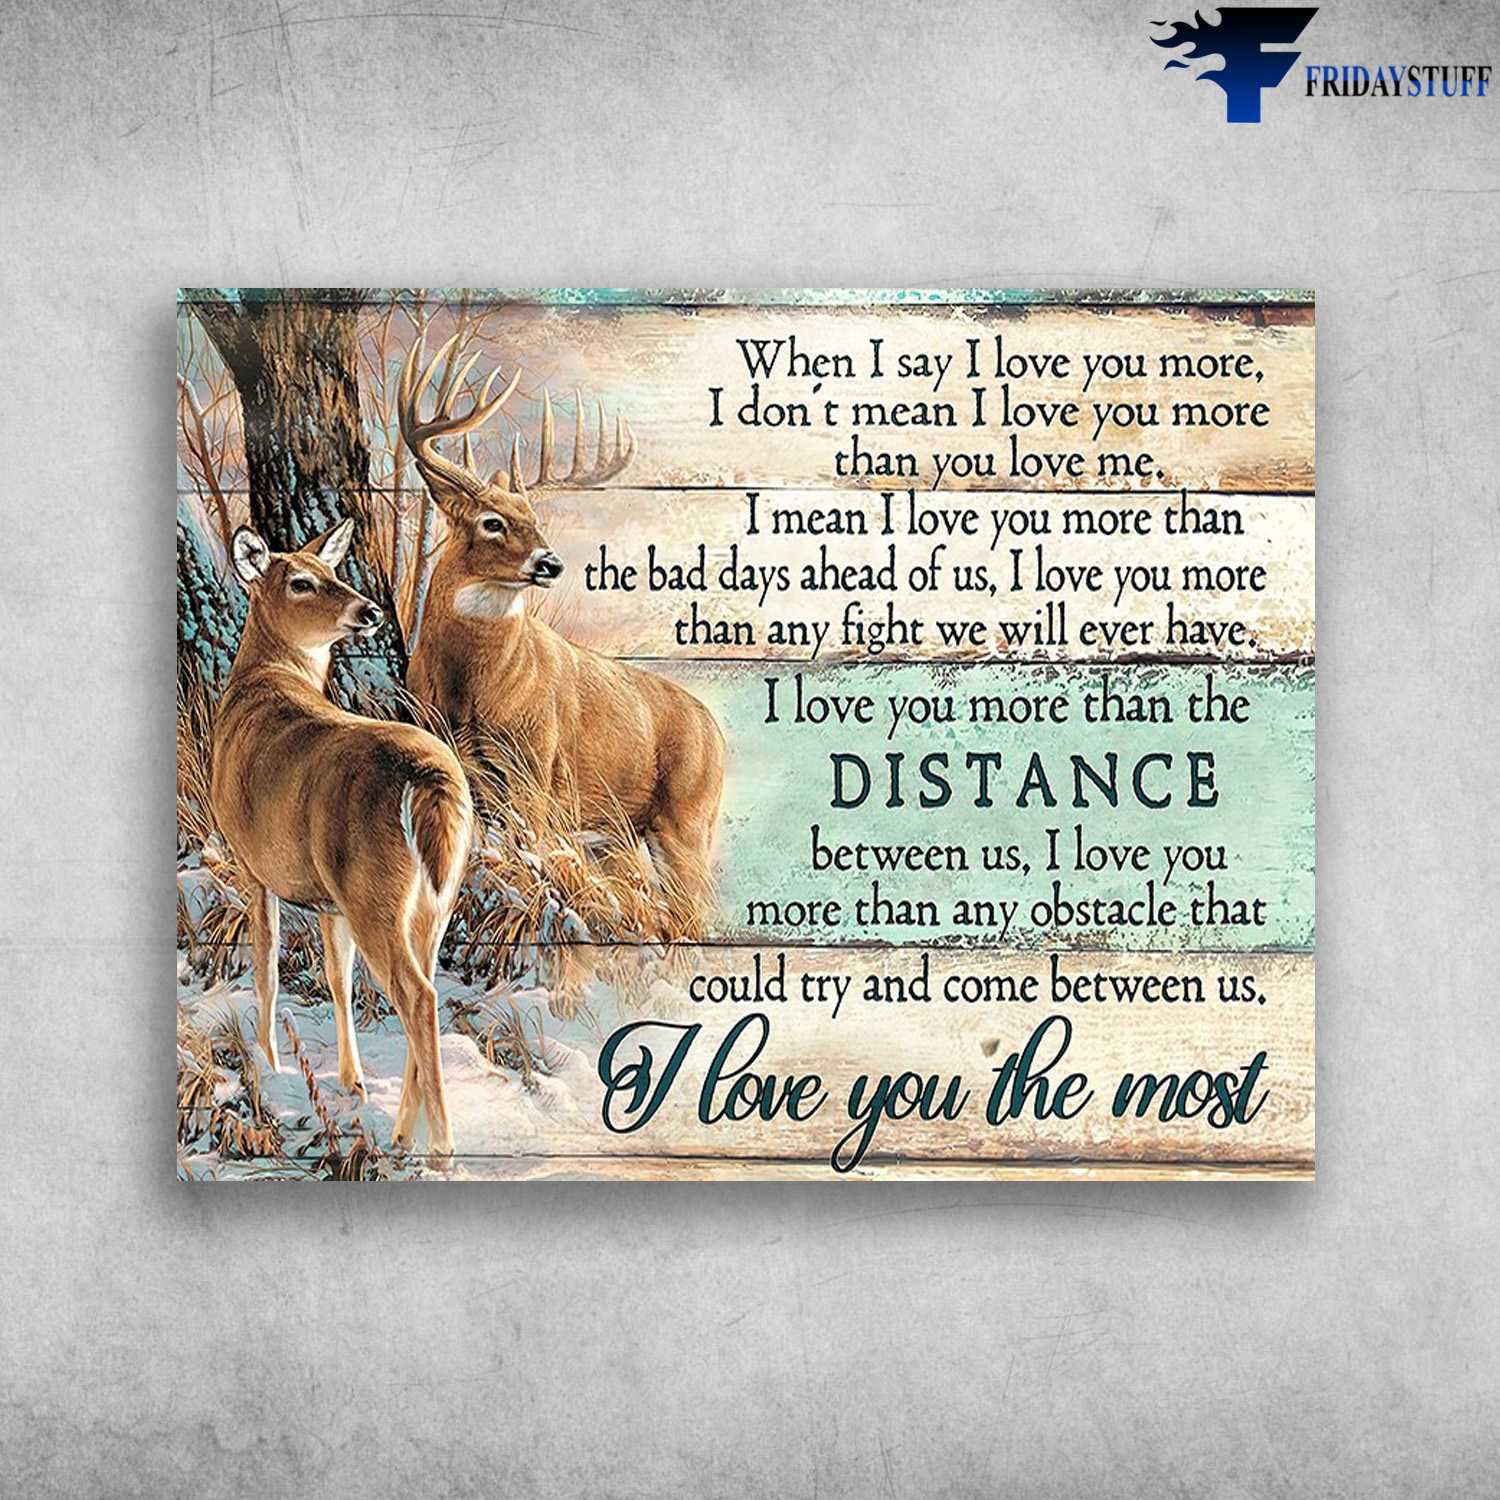 Deer Poster, When I Say I Love You More, I Don't Mean I Love You More Than You Love Me, I Mean I Love You More Than The Bad Days Ahead Of Us, I Love You